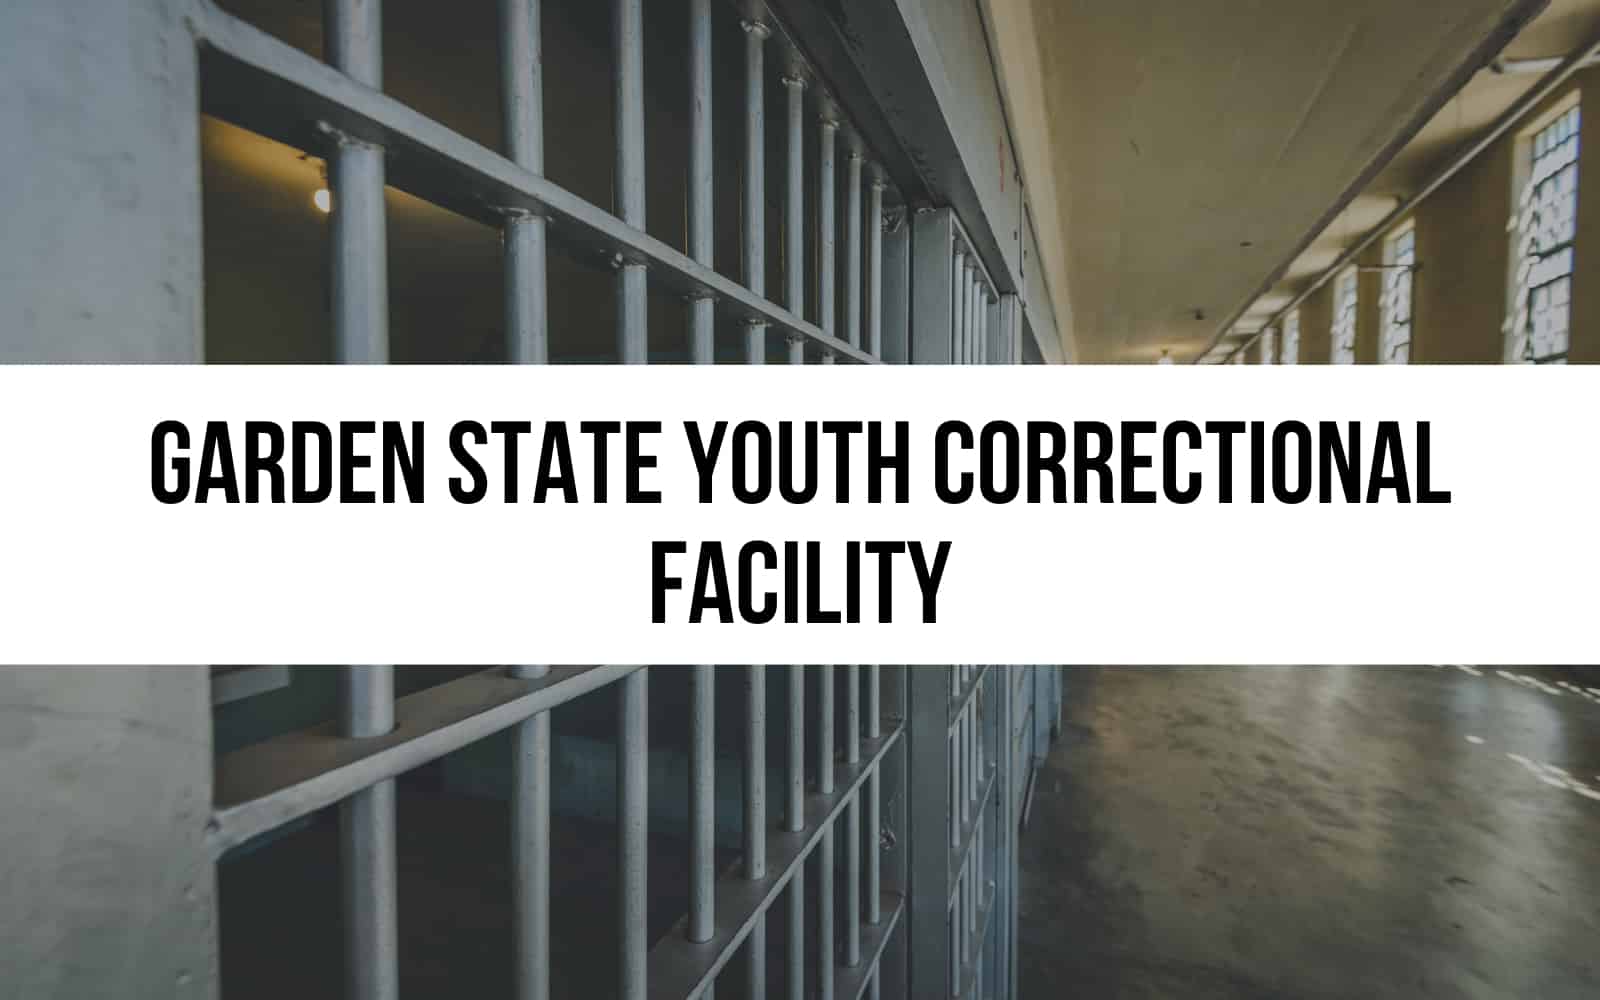 Garden State Youth Correctional facility